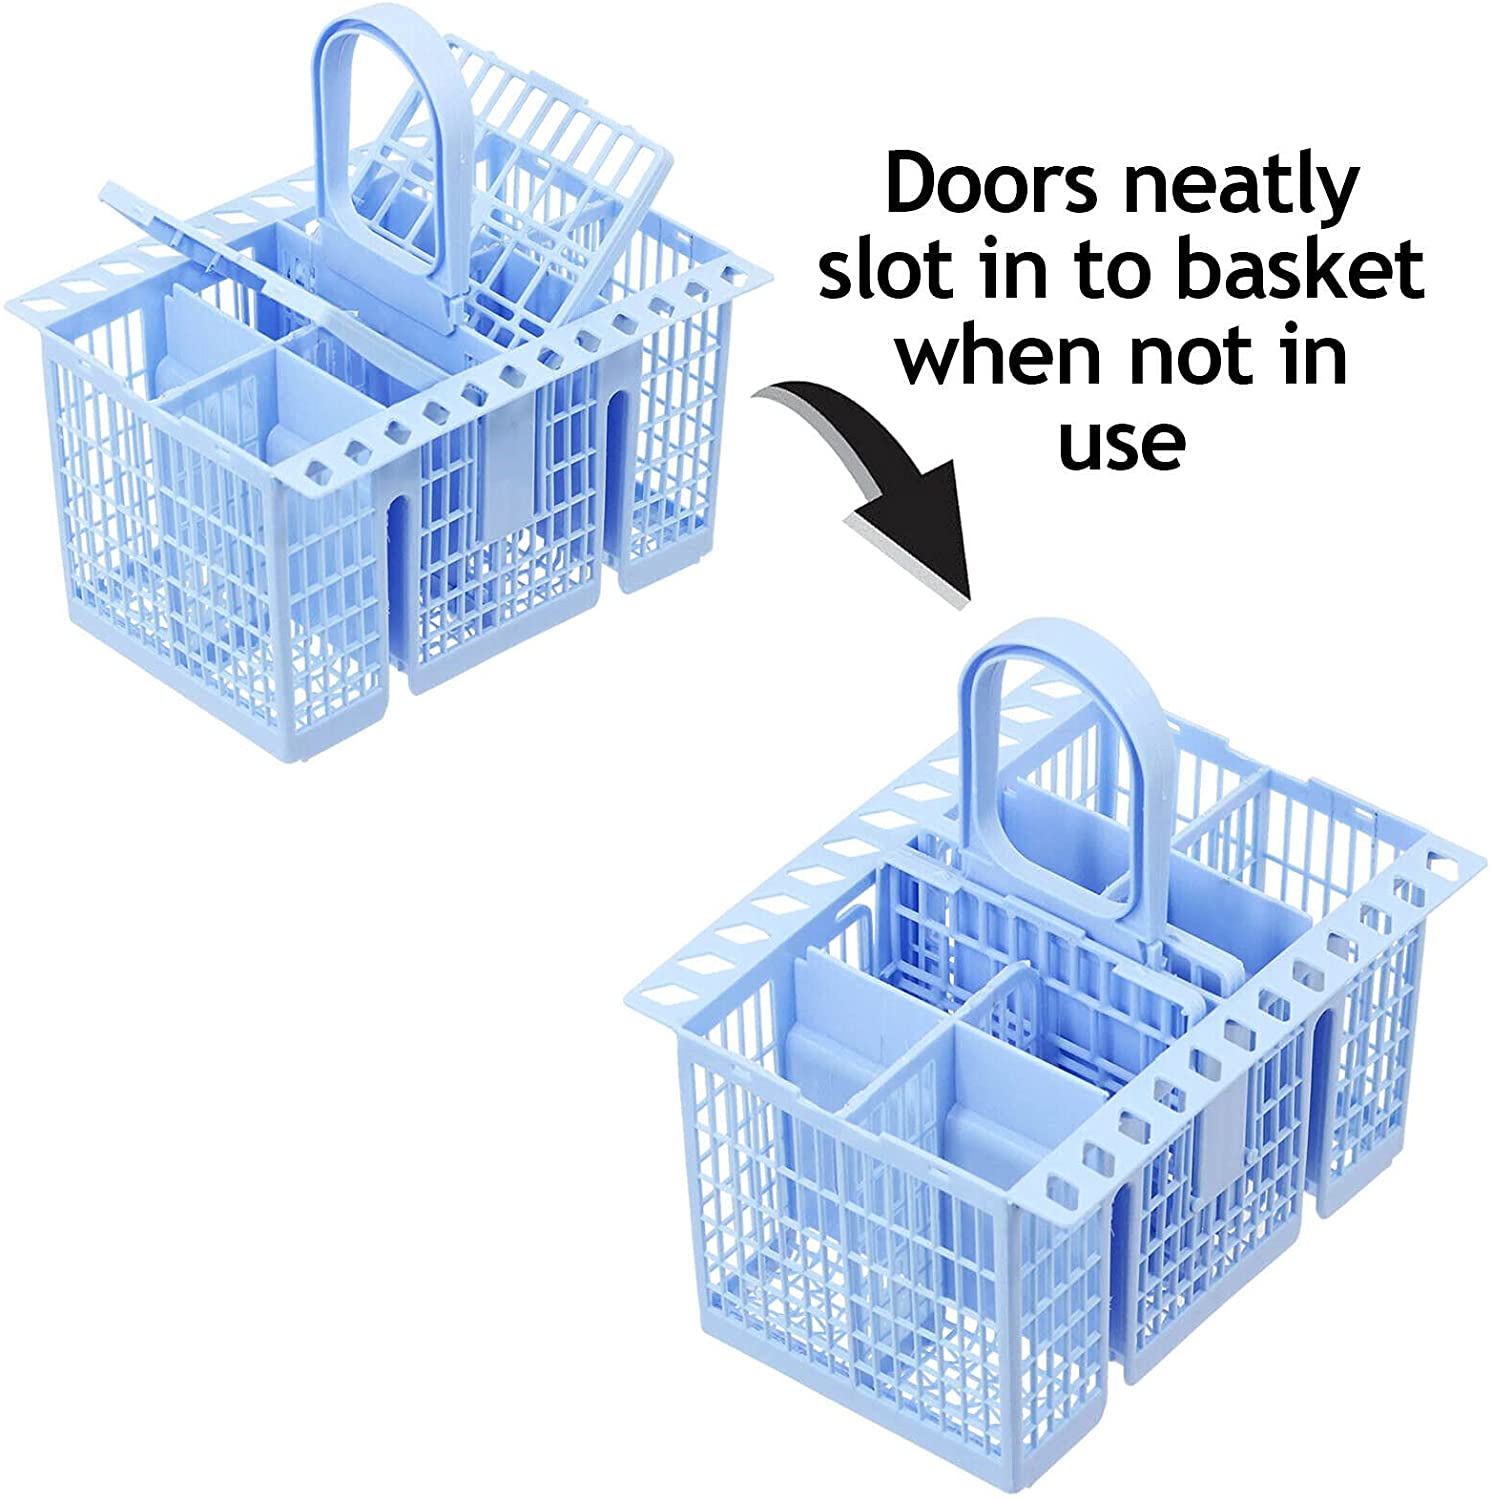 SPARES2GO Cutlery Basket compatible with CATA Dishwasher (Blue, 220 x 208 x 160mm)